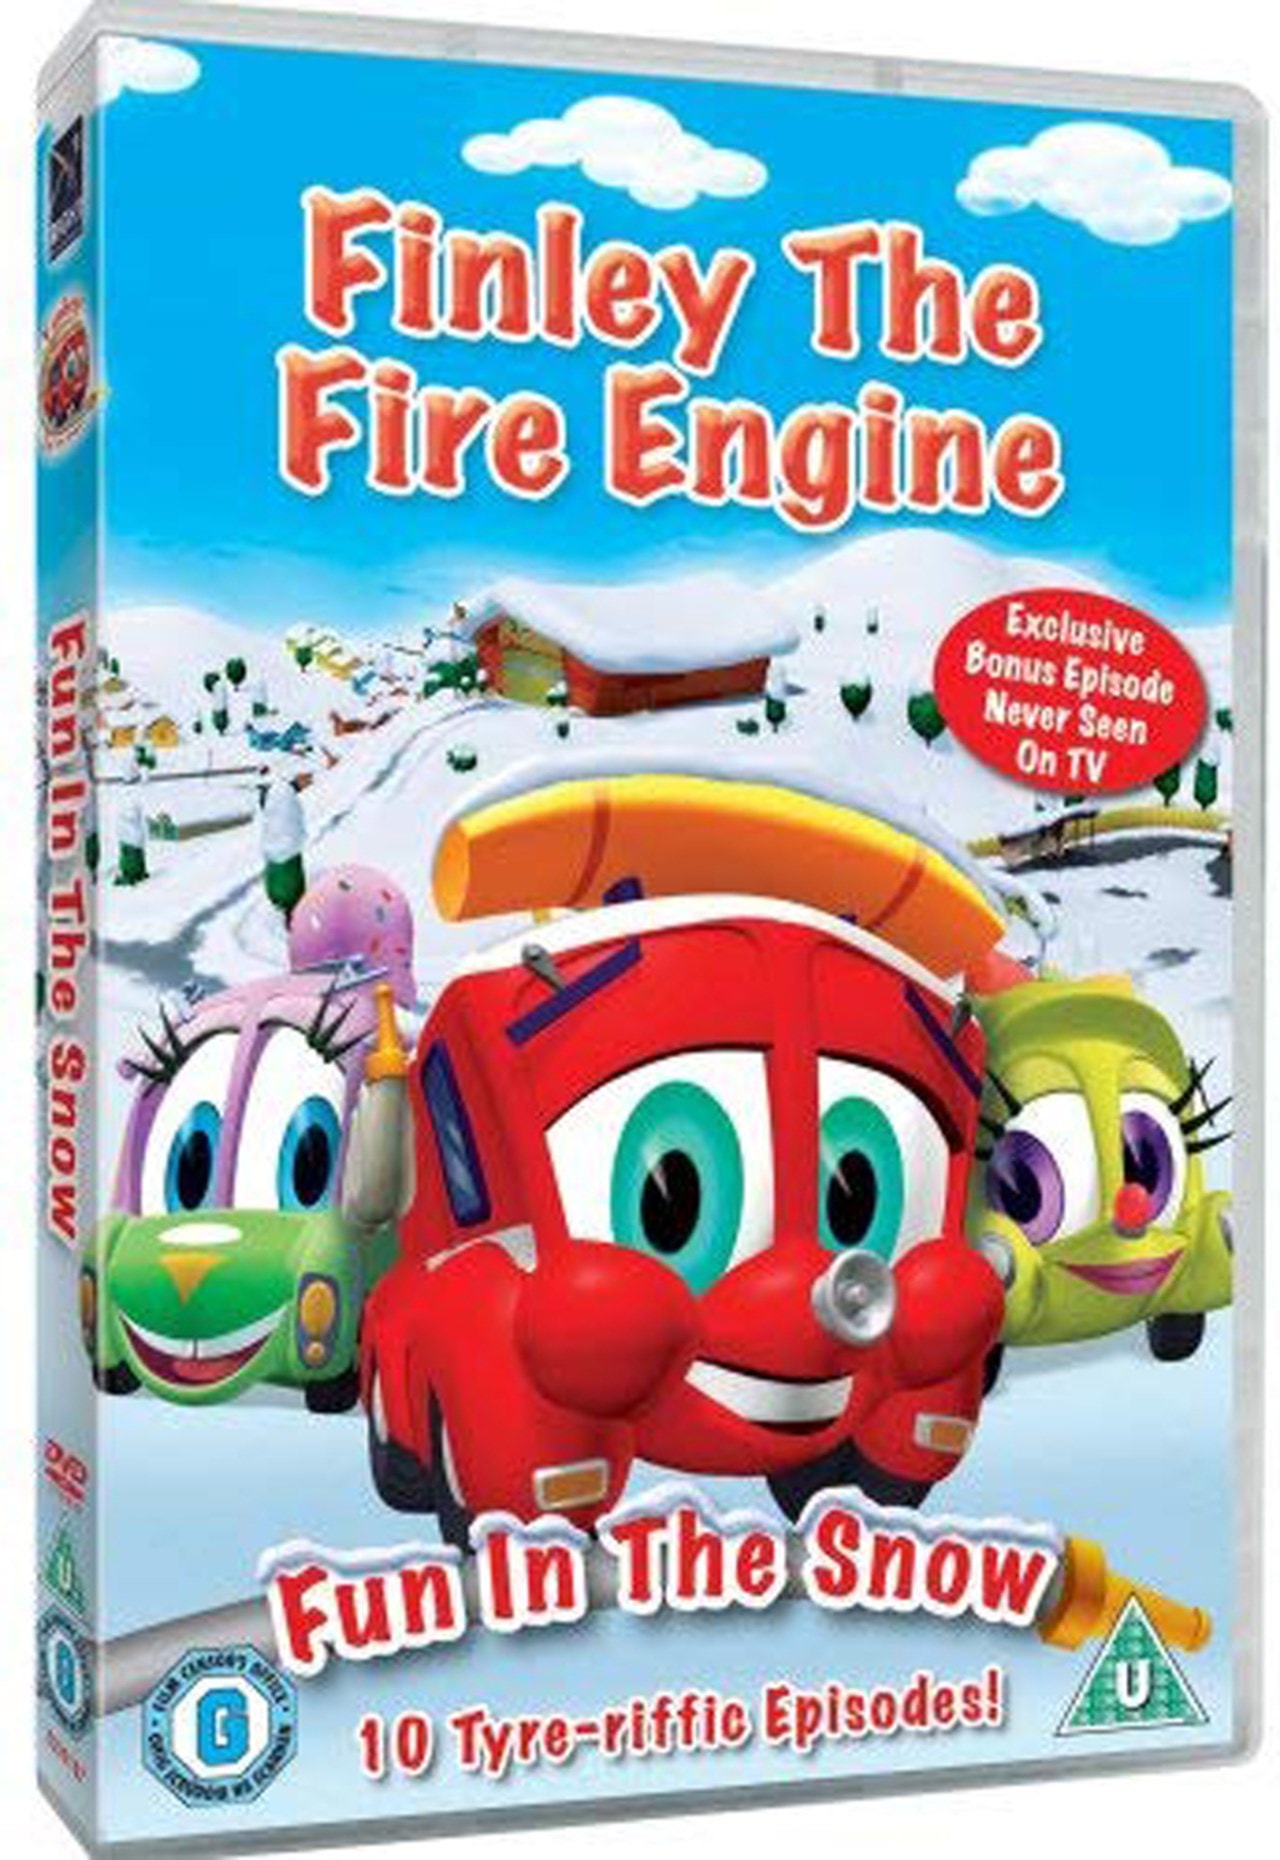 finley the fire engine toys